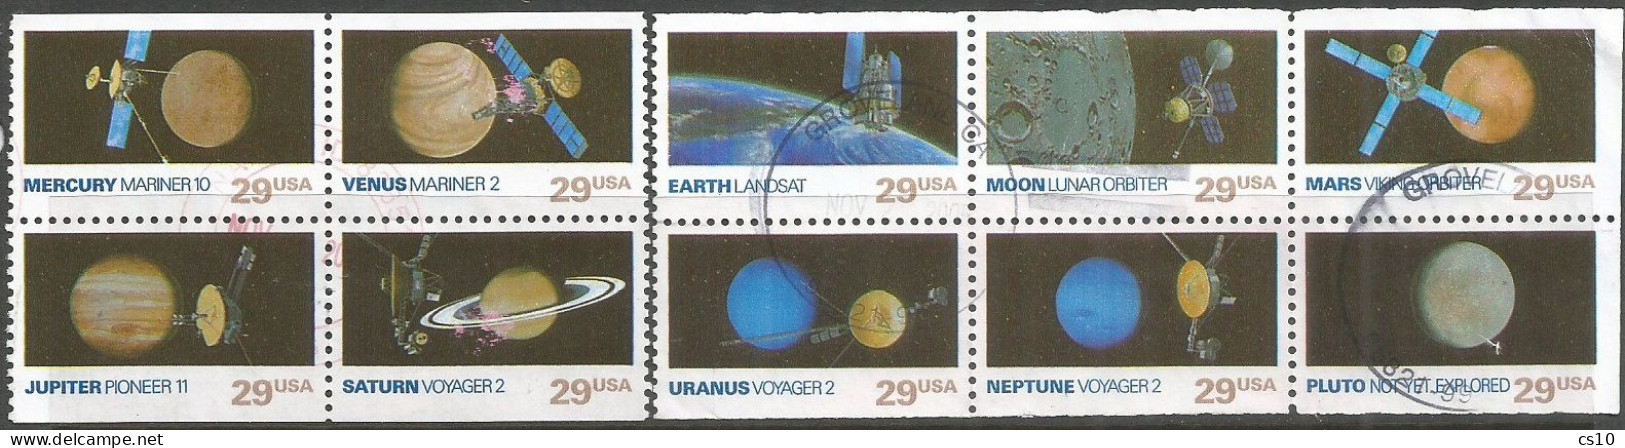 USA 1991 Space Exploration Cpl10v Set In #2 Blocks From Booklet Of 4+6pcs In VFU Condition REALLY USED - Tiras Cómicas & Múltiples